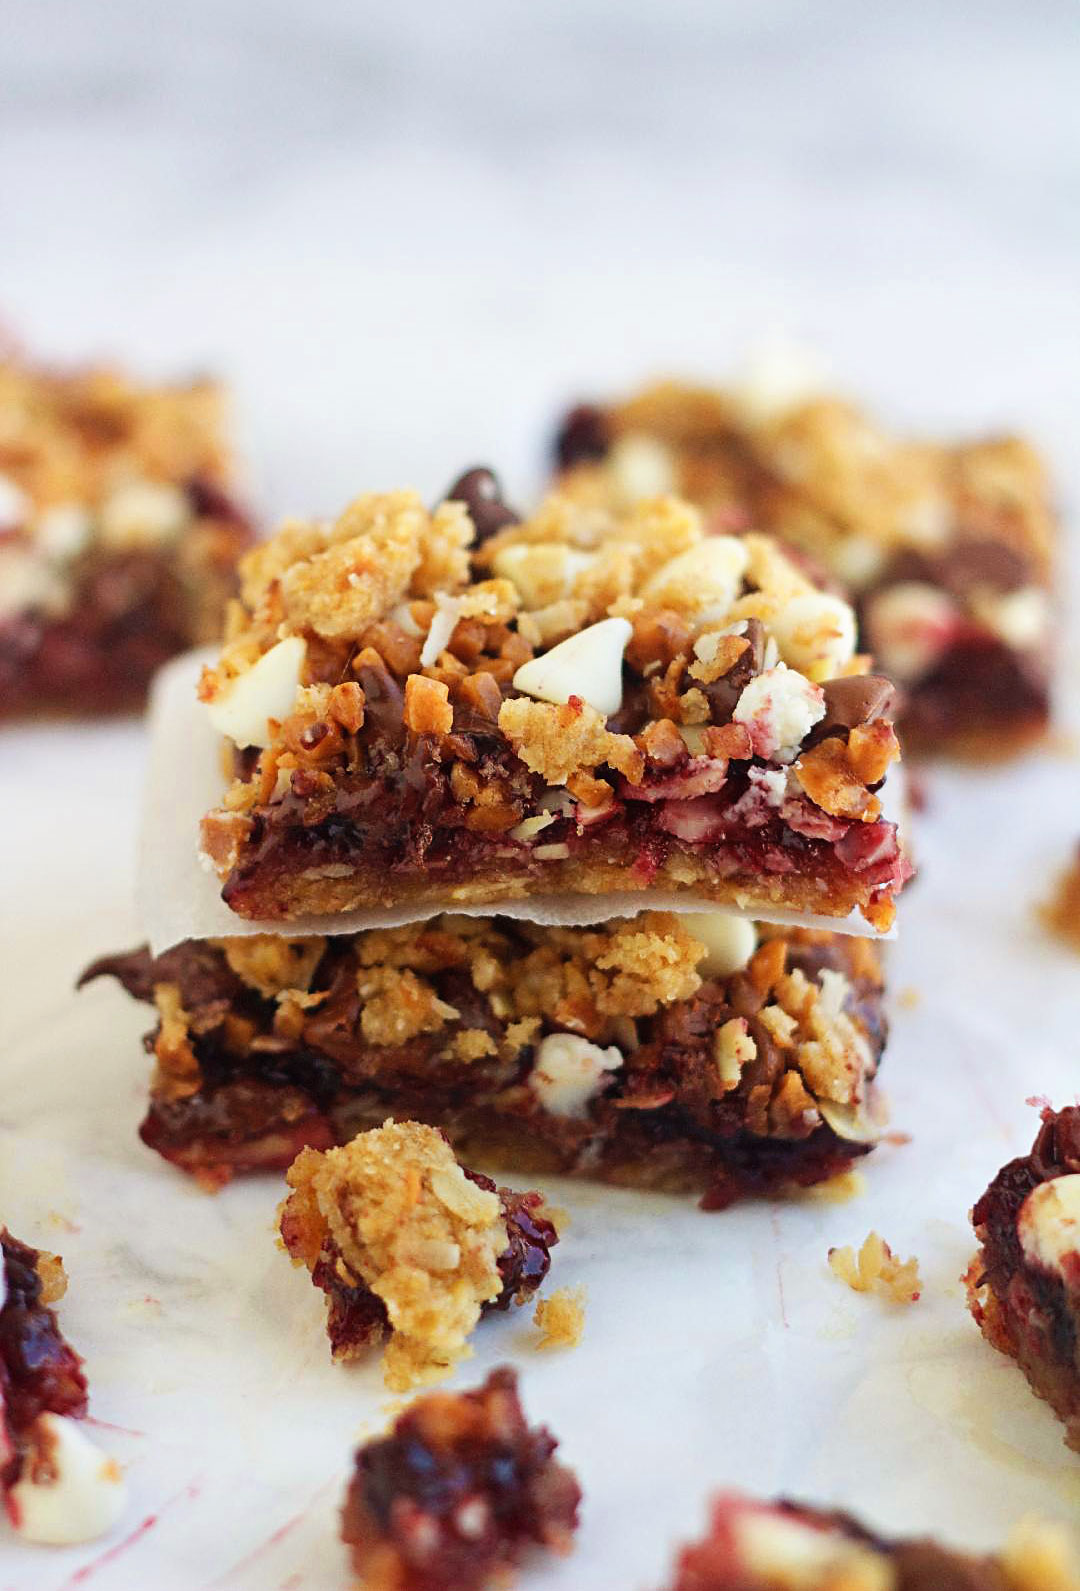 Blackberry Bliss Bars have a brown sugar cookie base with coconut and oats and are topped with a layer of blackberry jam, three kinds of chocolate chips and toffee pieces. Life-in-the-Lofthouse.com